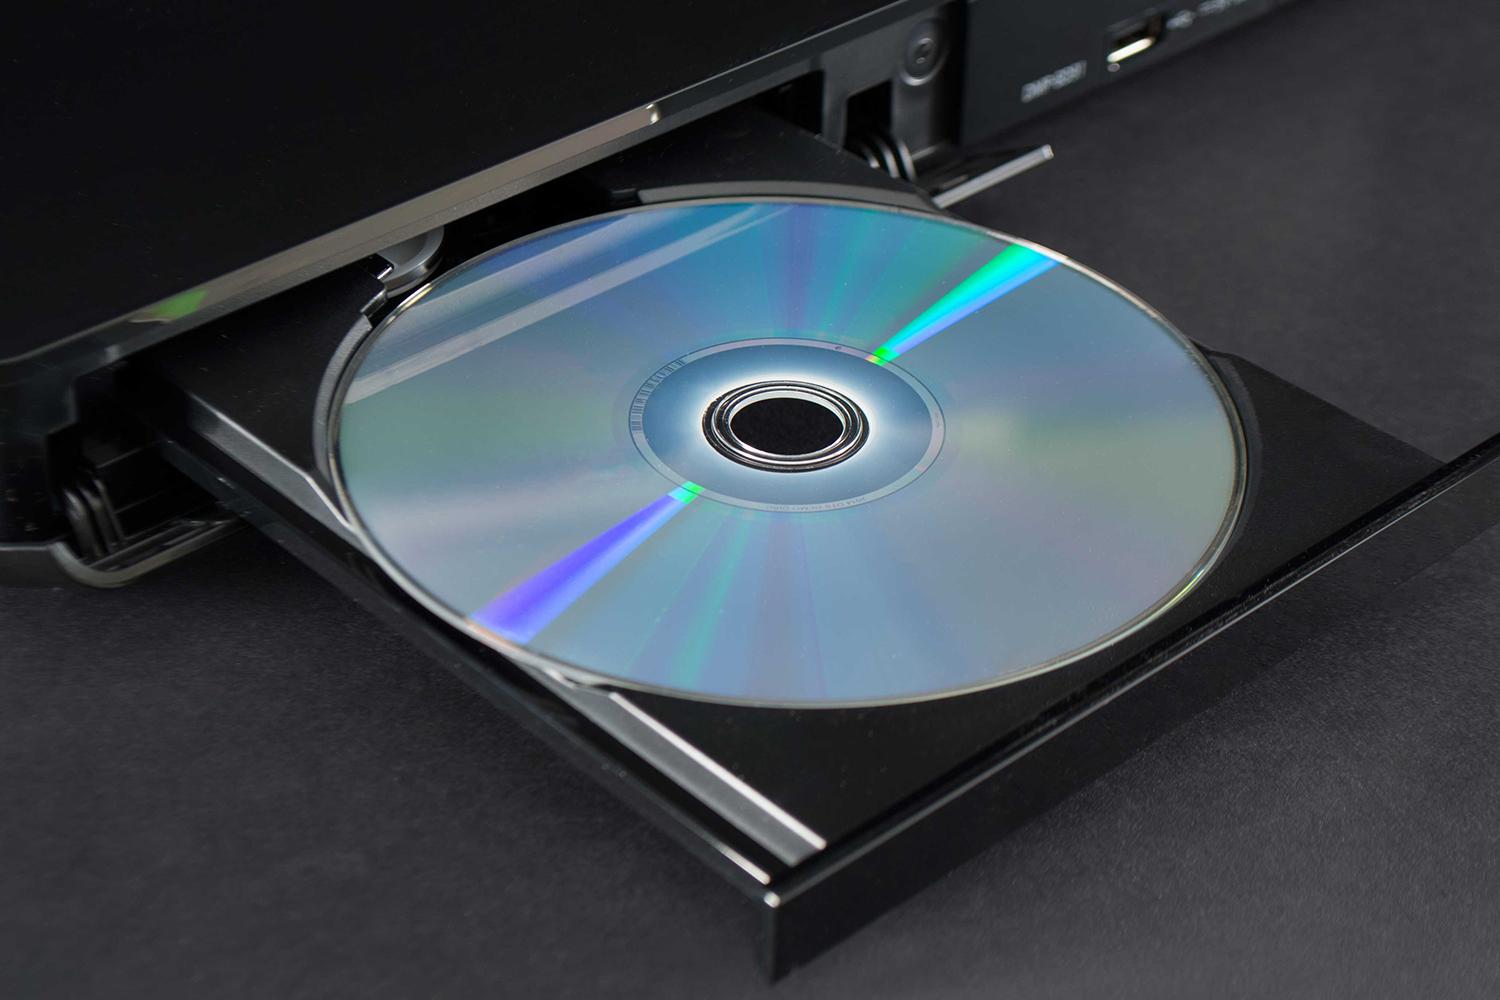 How to Convert VHS to Digital to Keep Your Old Memories?